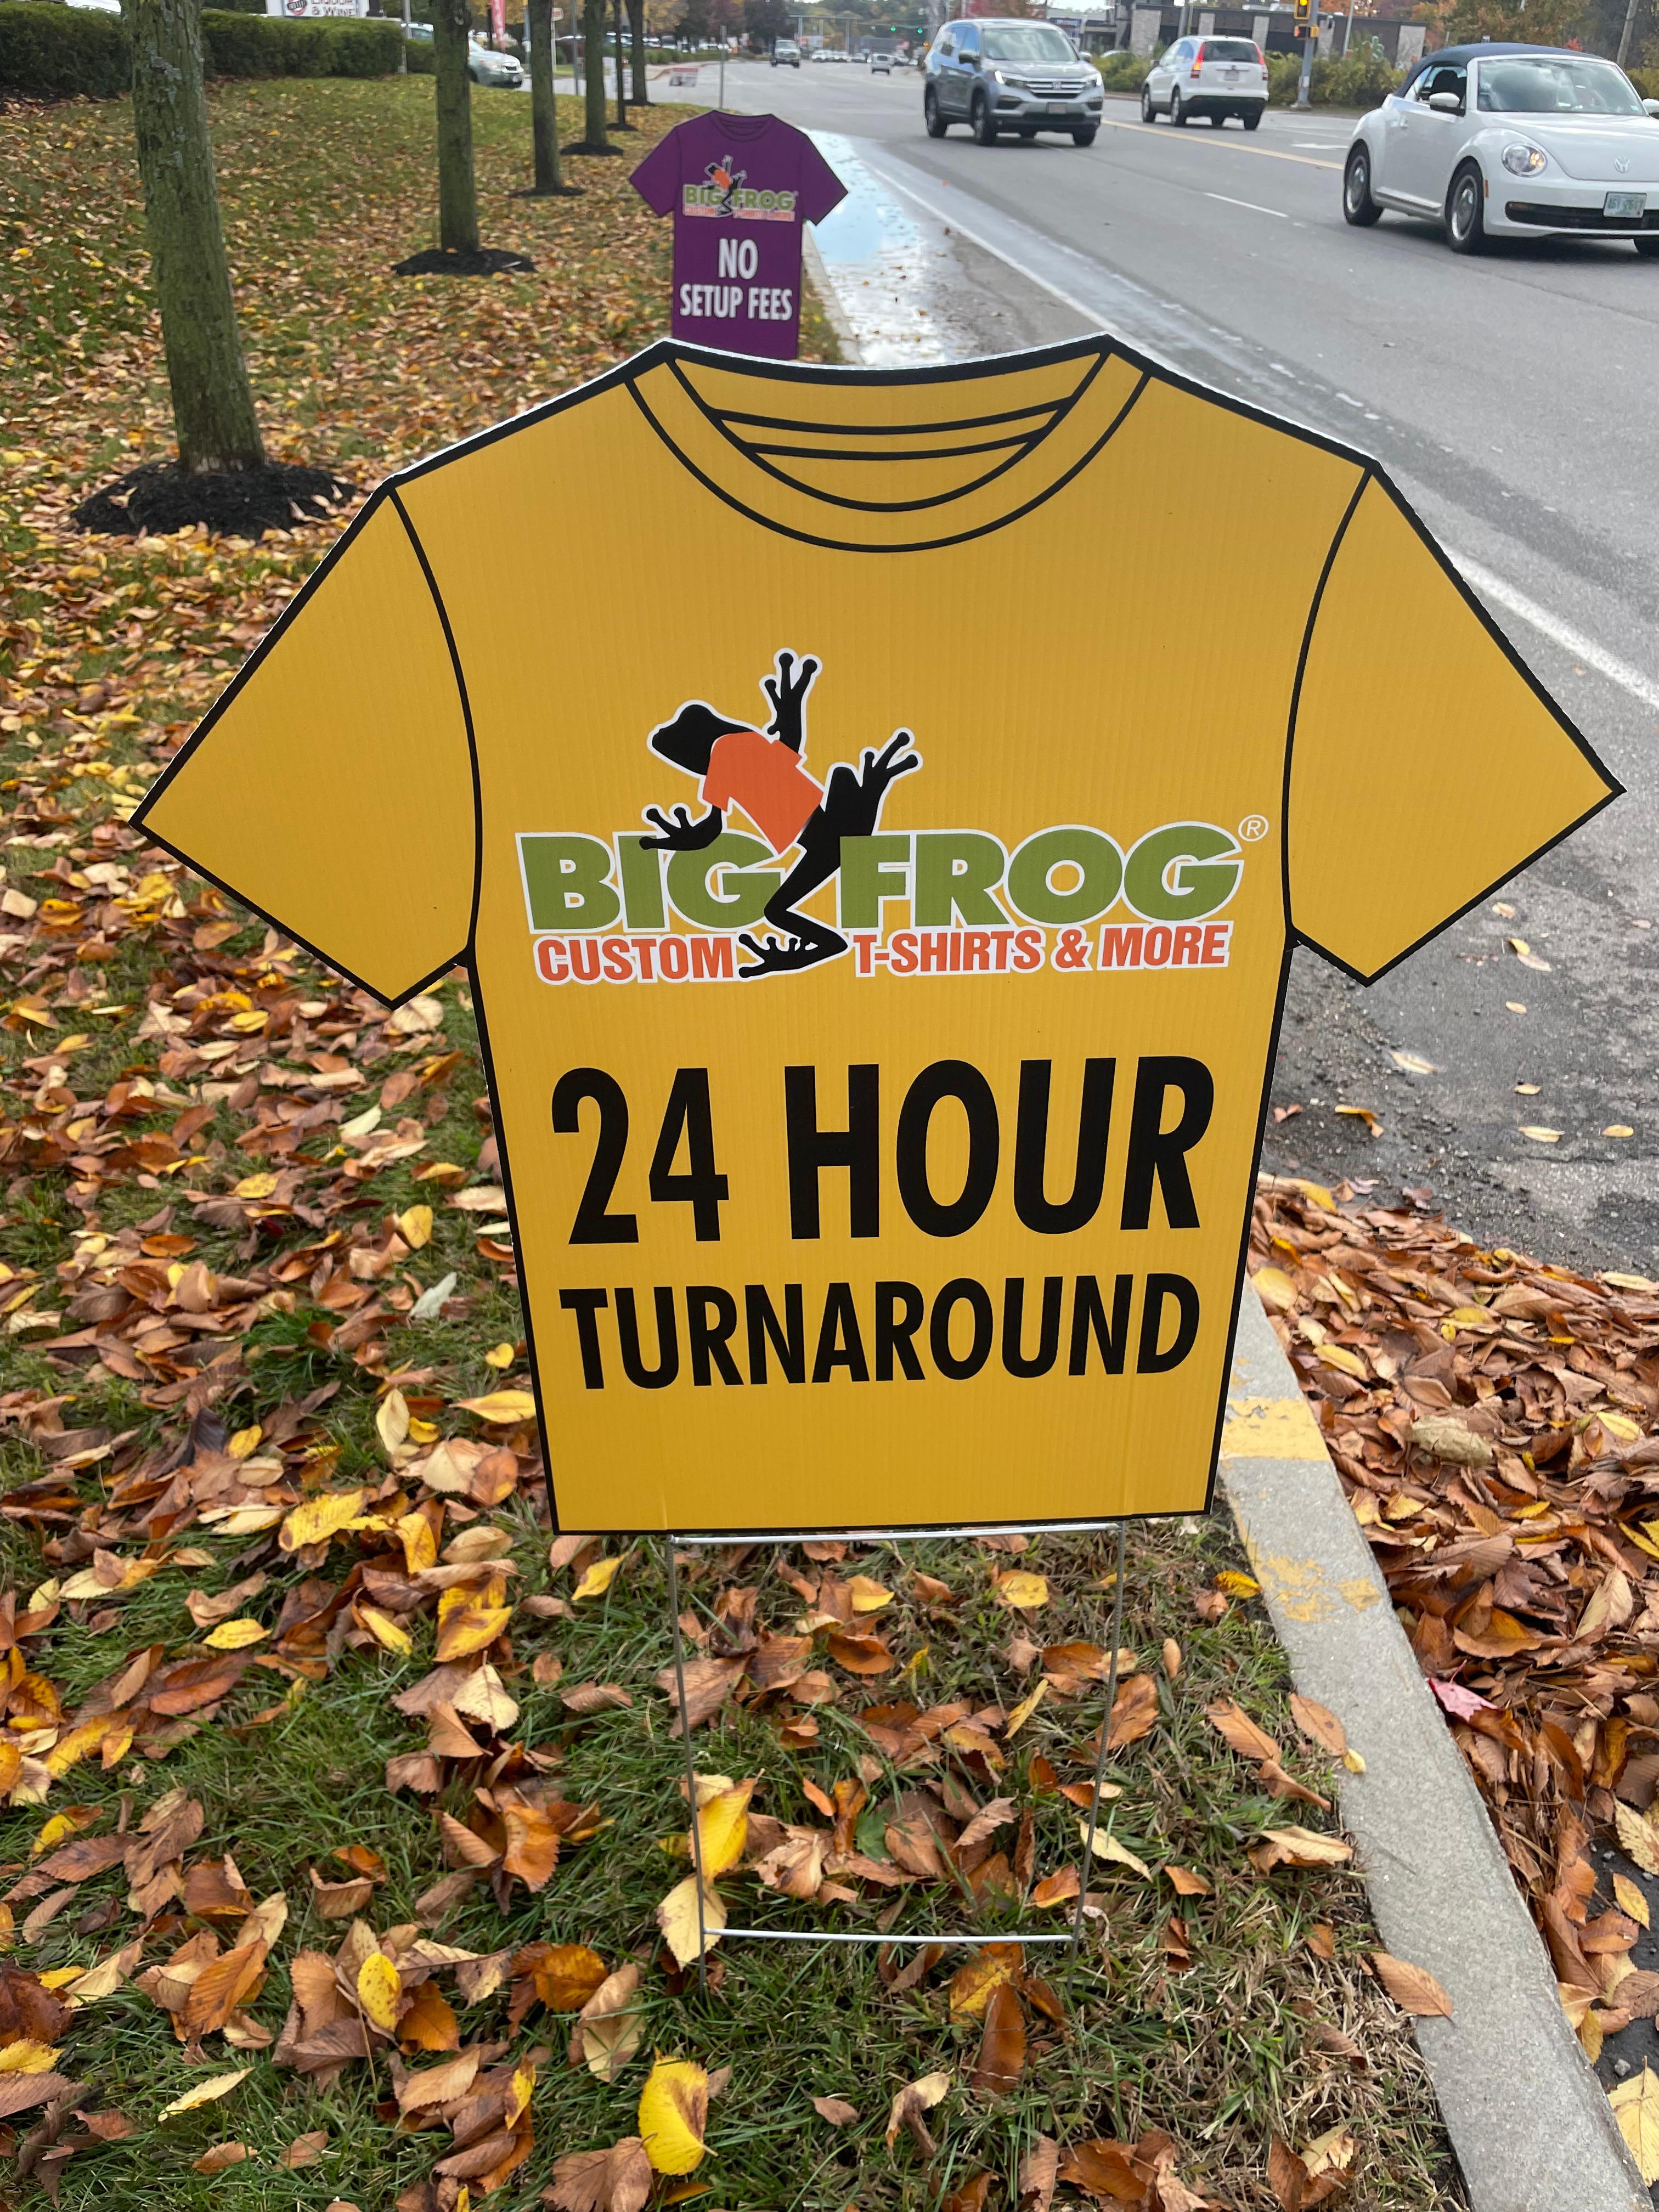 Need shirts fast? We have 24 Hour Turnaround on in-stock Direct-to-Print garments.